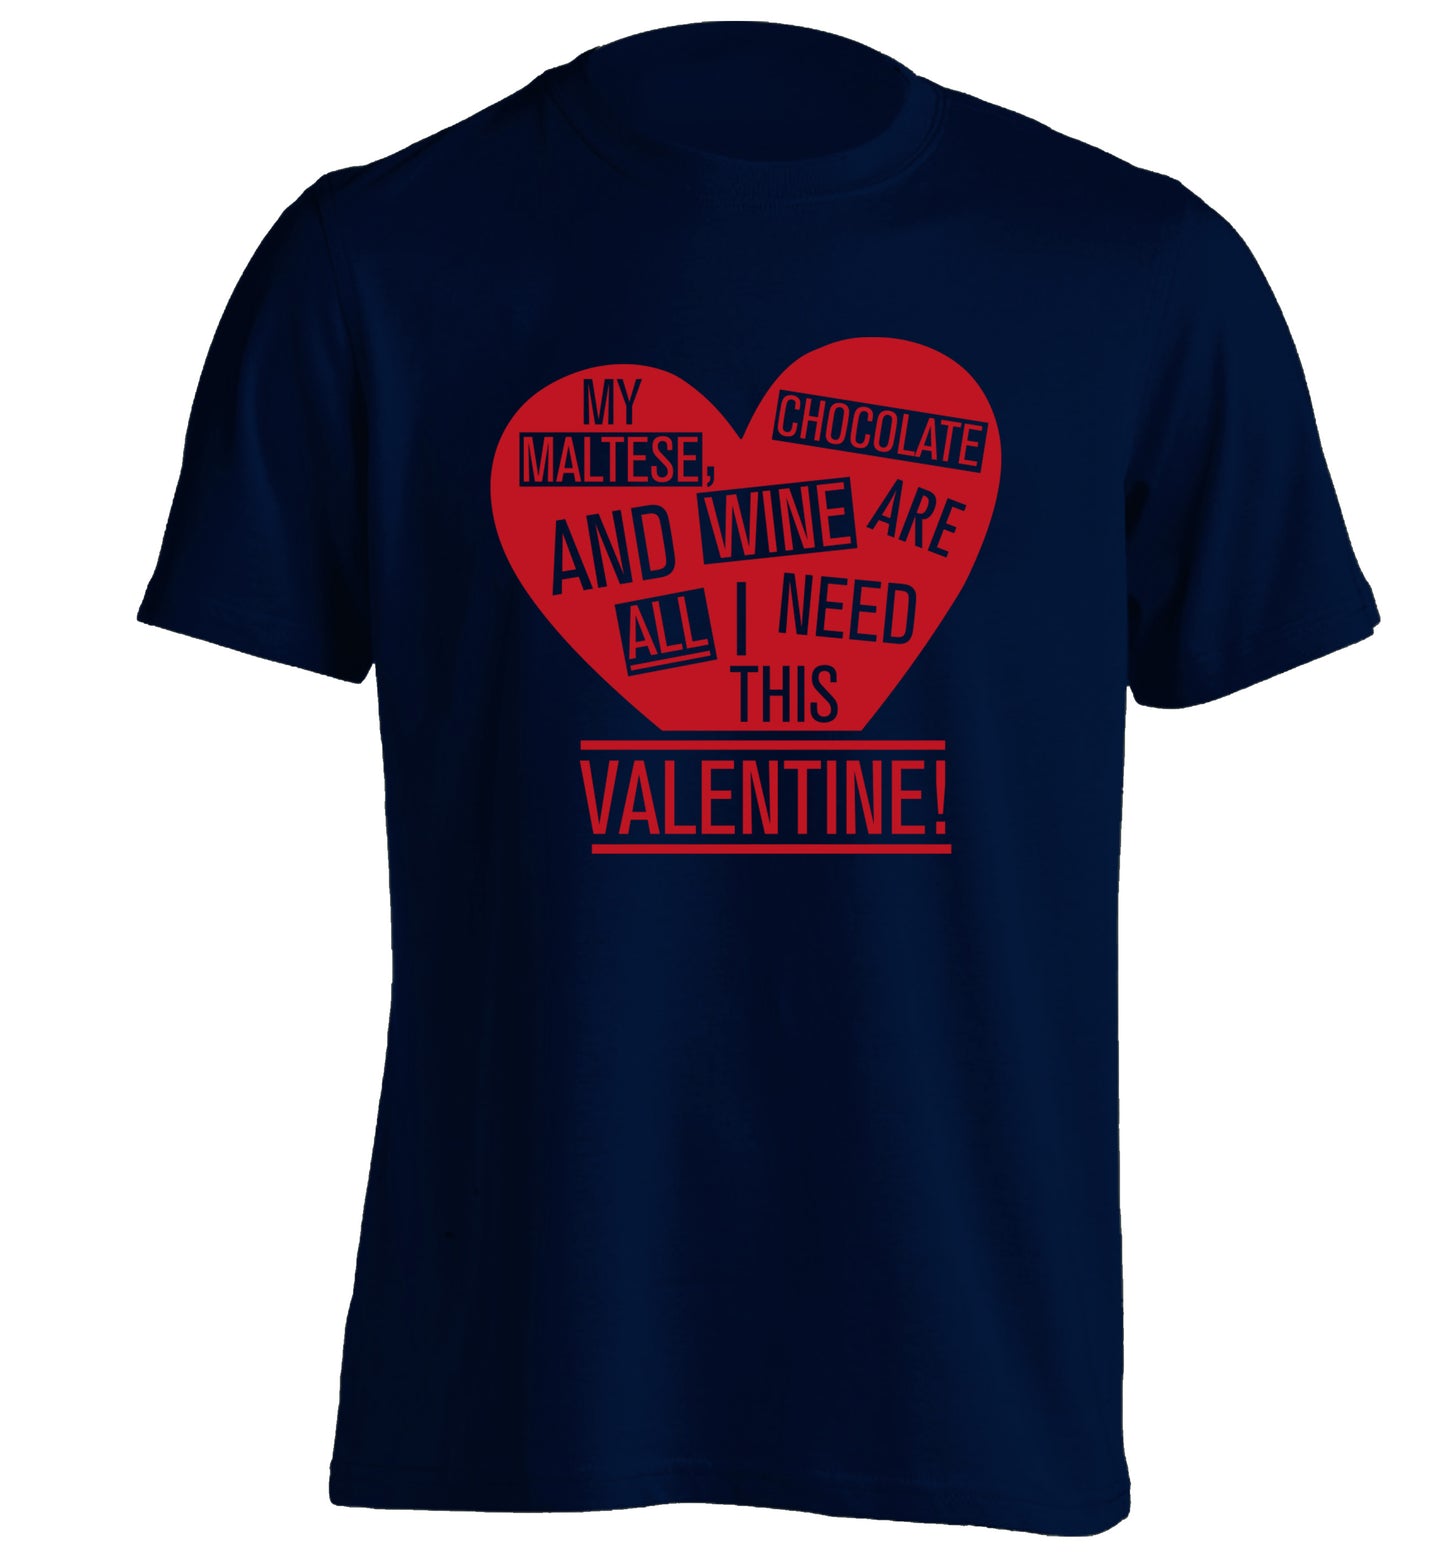 My maltese, chocolate and wine are all I need this valentine! adults unisex navy Tshirt 2XL